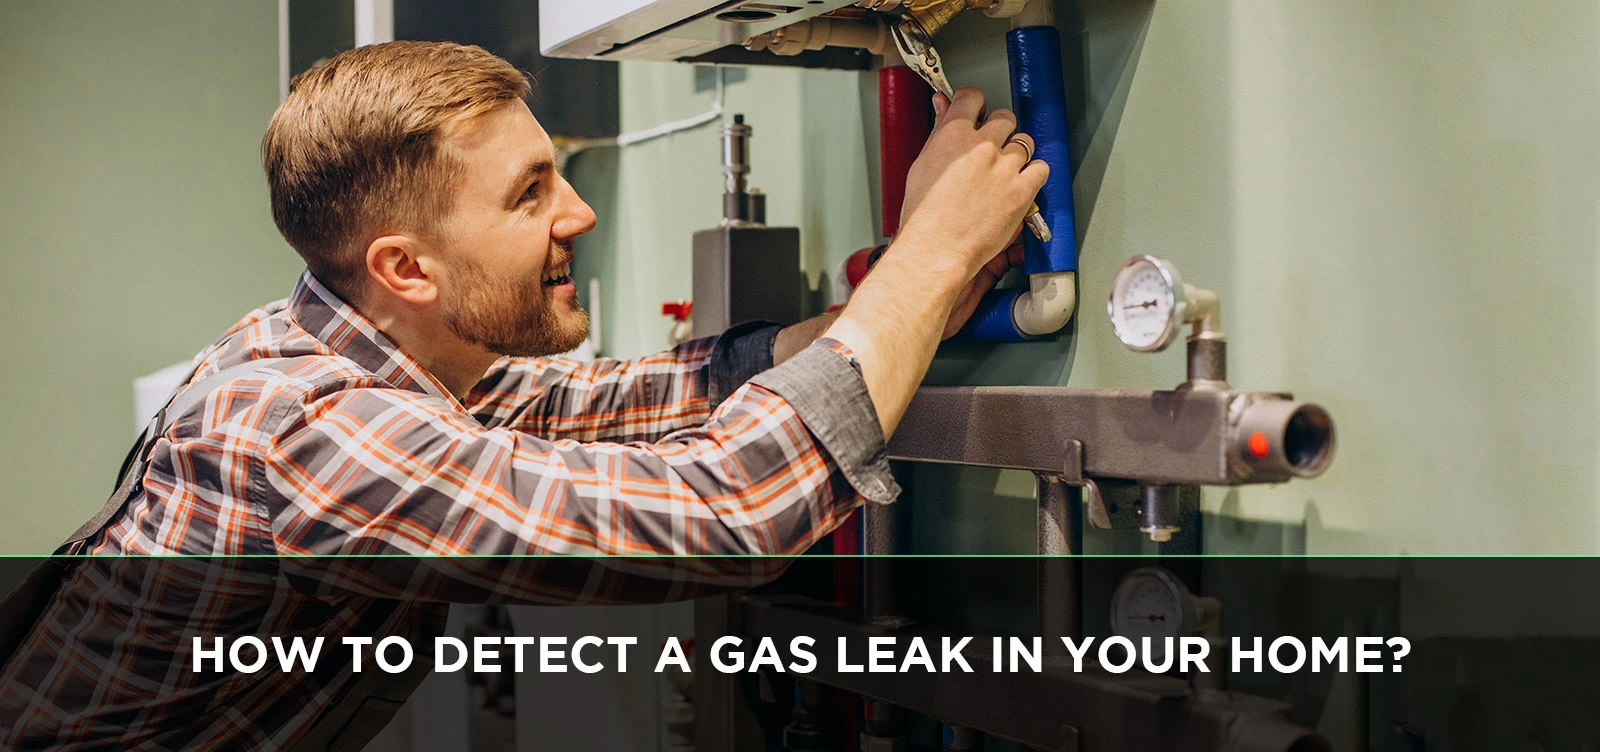 How to Detect a Gas Leak in Your Home